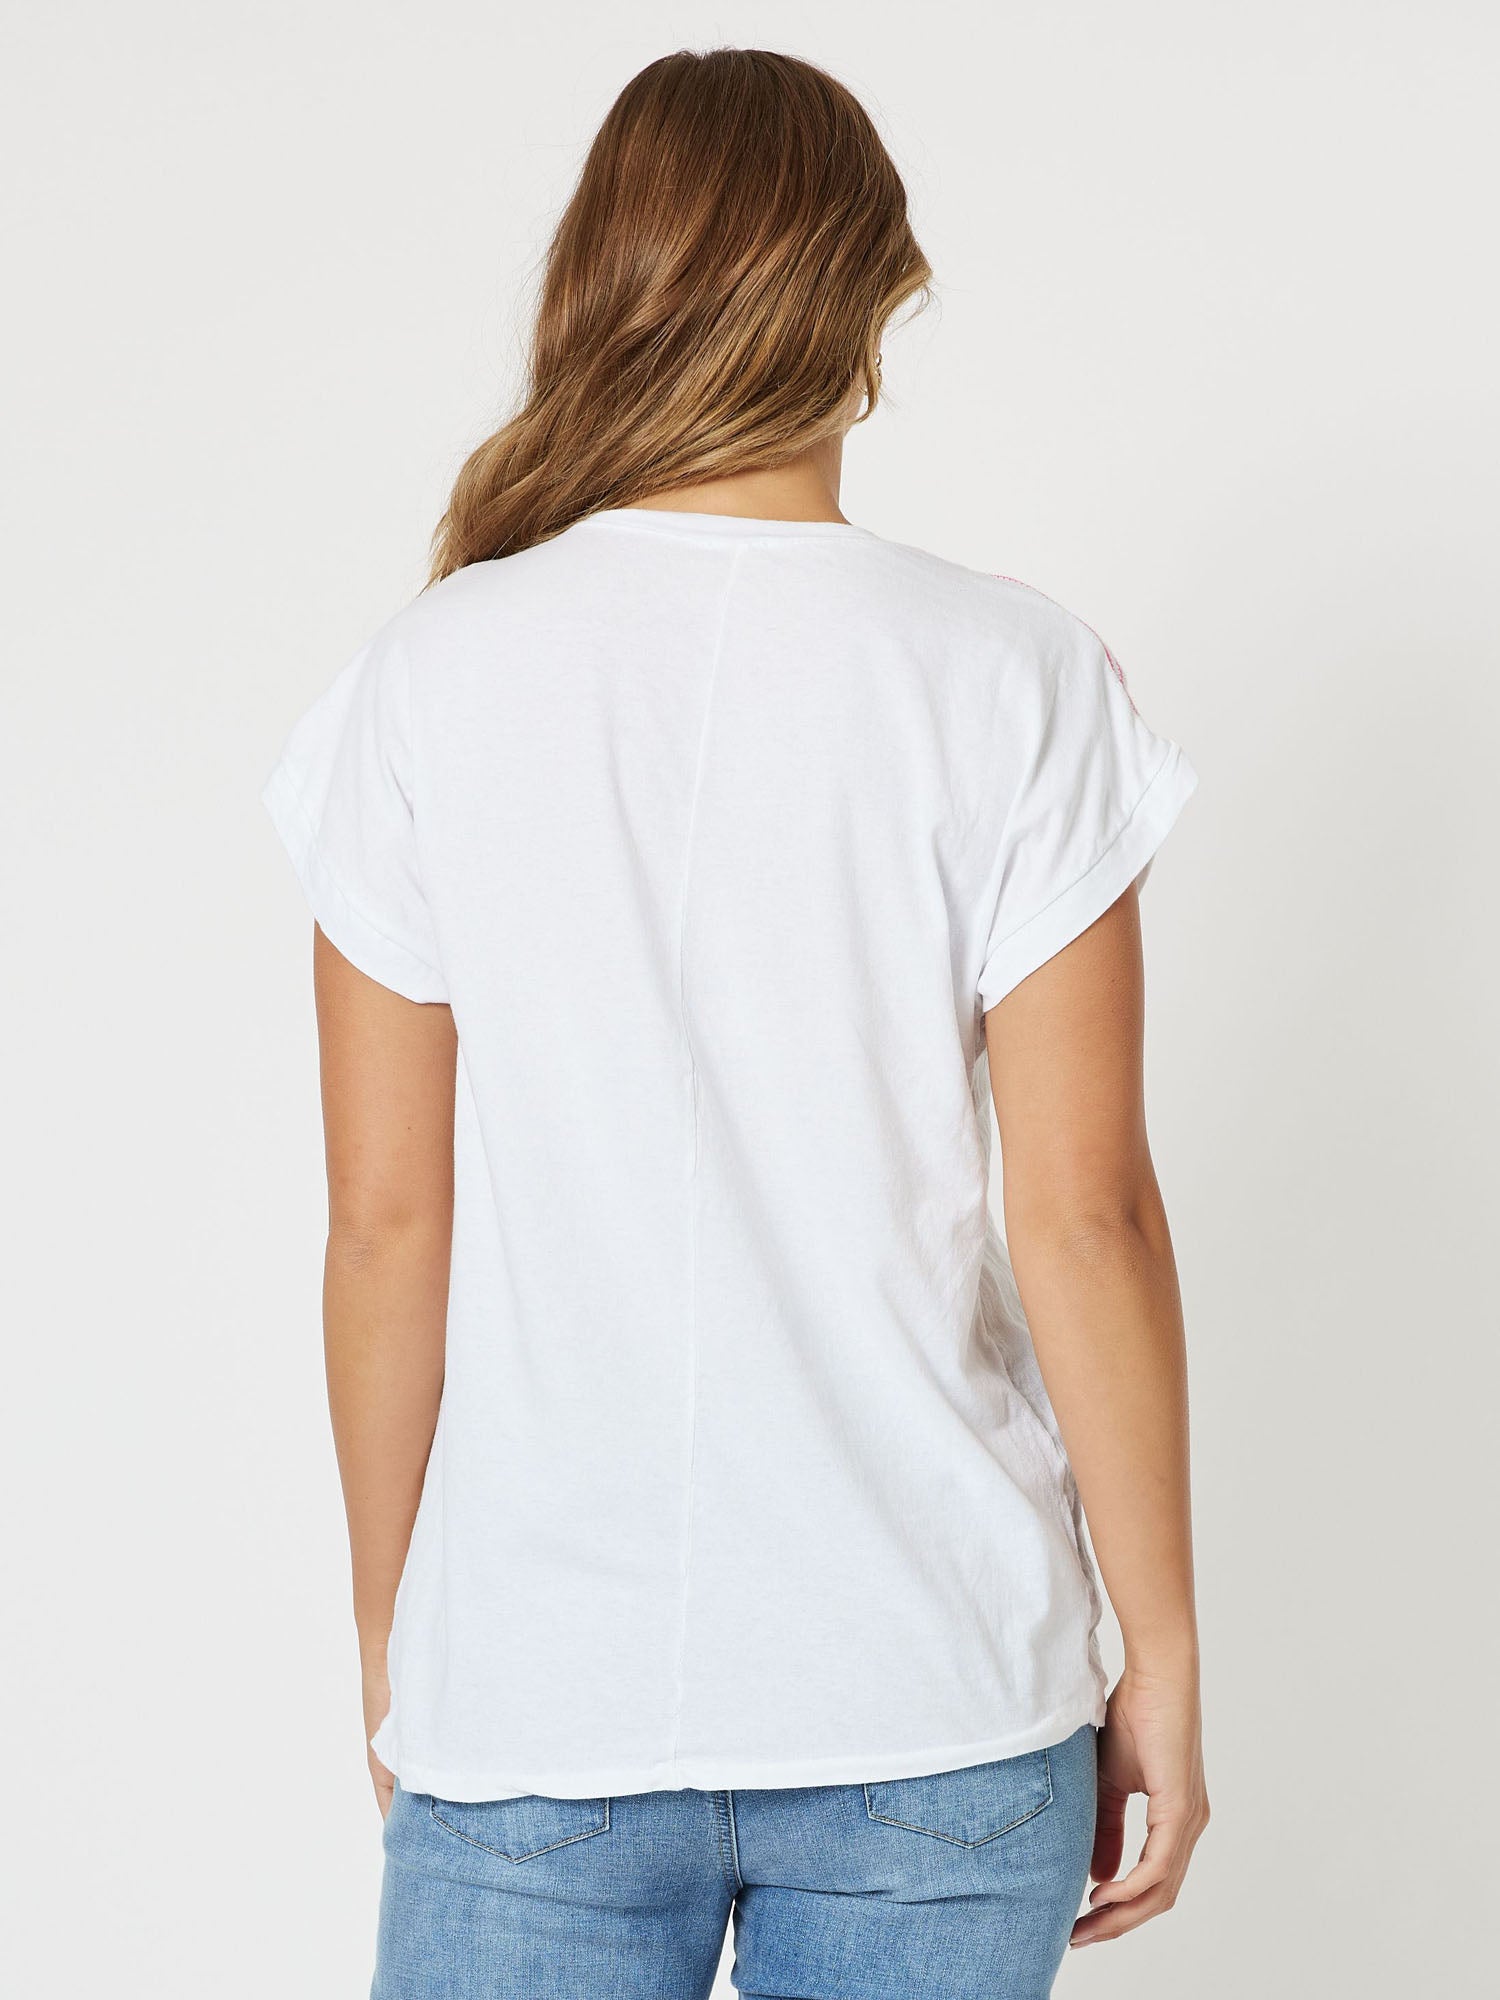 Love Yourself T-Shirt - White